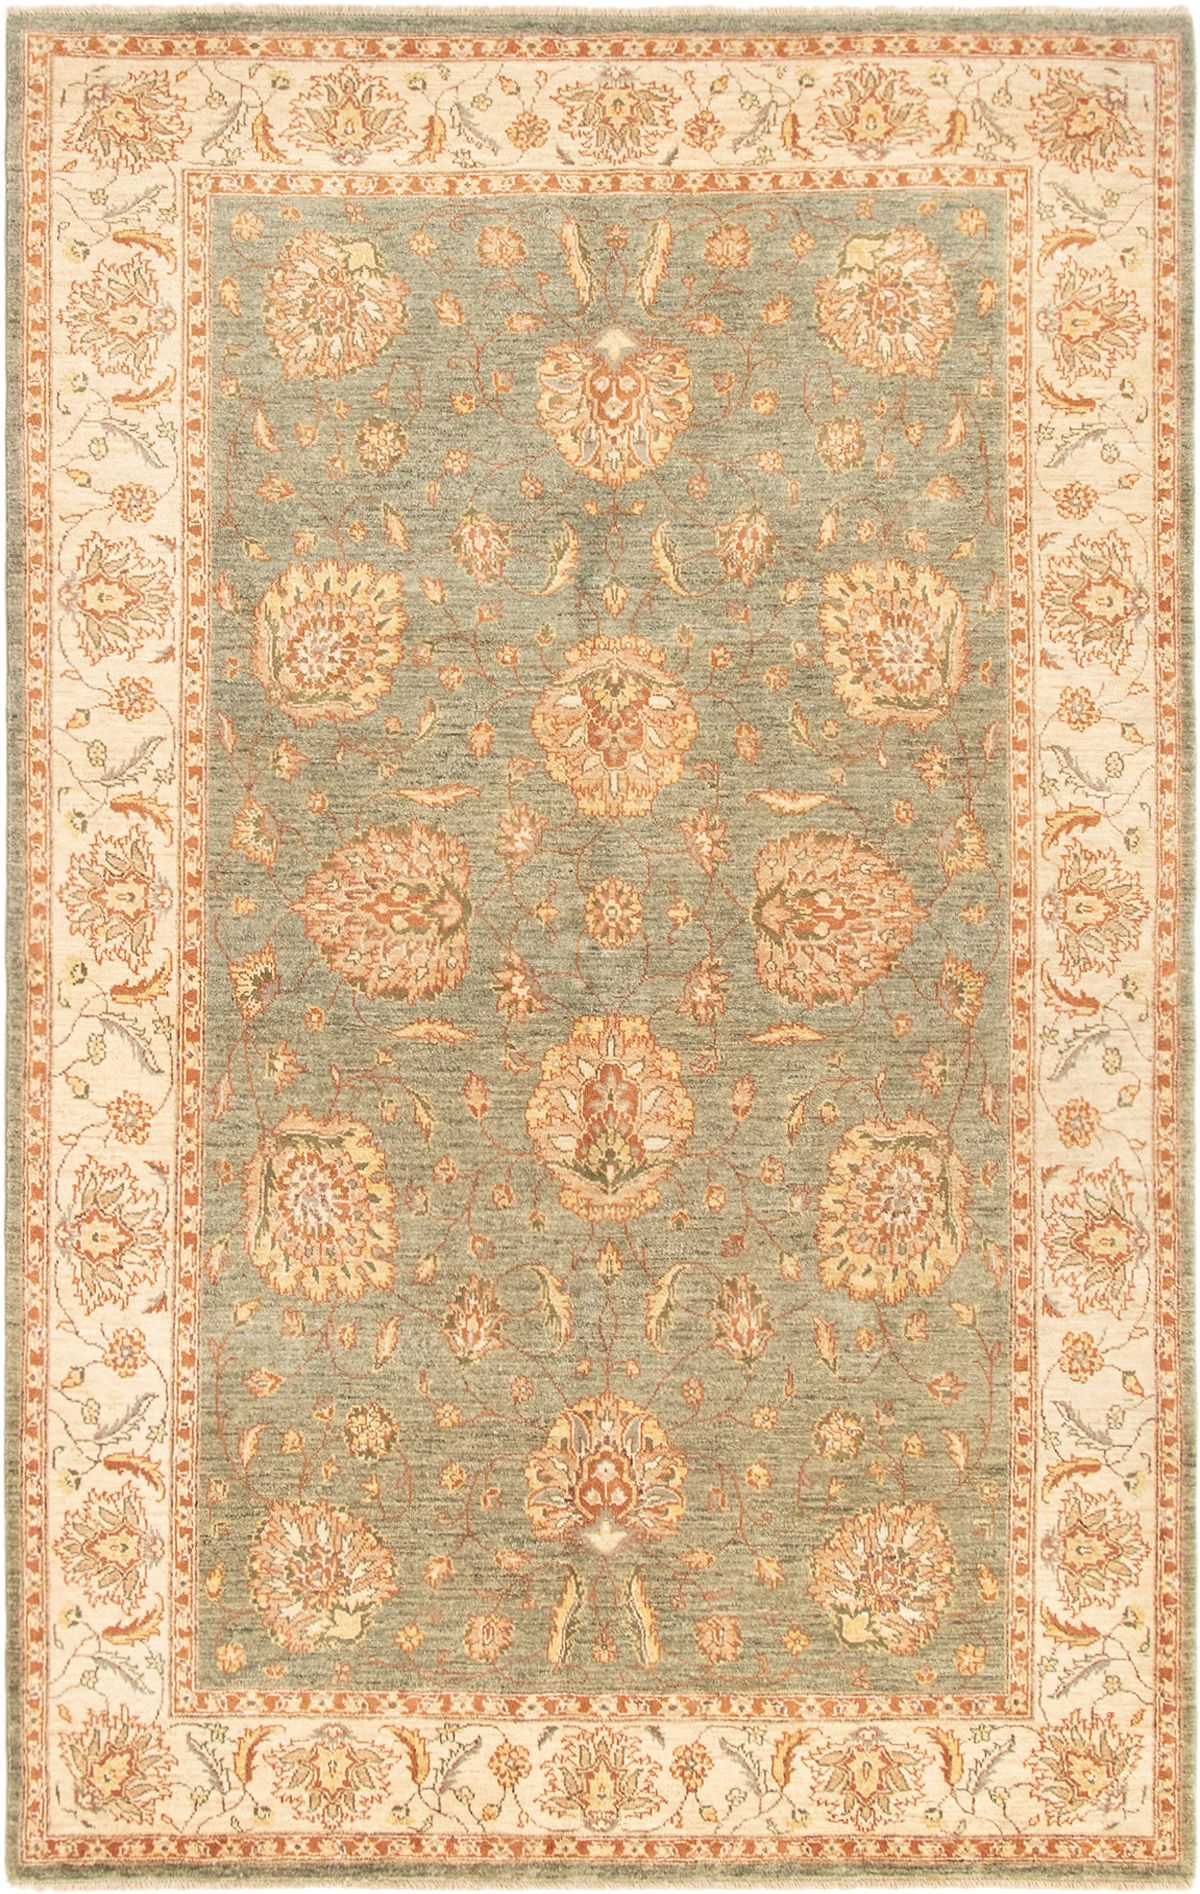 Hand-knotted Chobi Twisted Teal Wool Rug 6'2" x 9'9" Size: 6'2" x 9'9"  